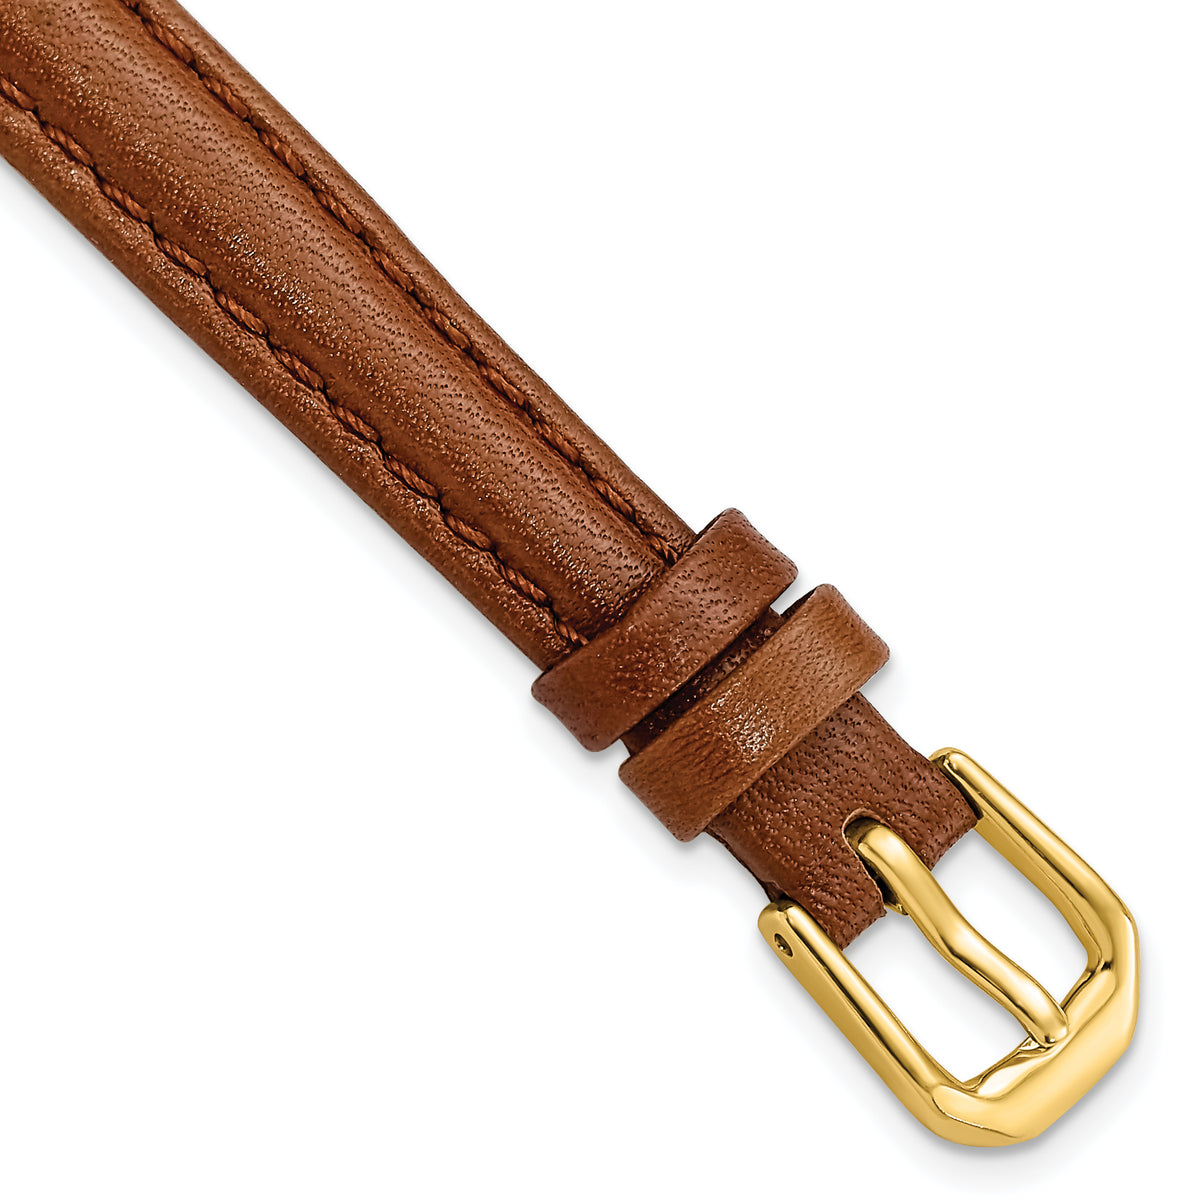 DeBeer 10mm Havana Smooth Leather with Gold-tone Buckle 6.75 inch Watch Band